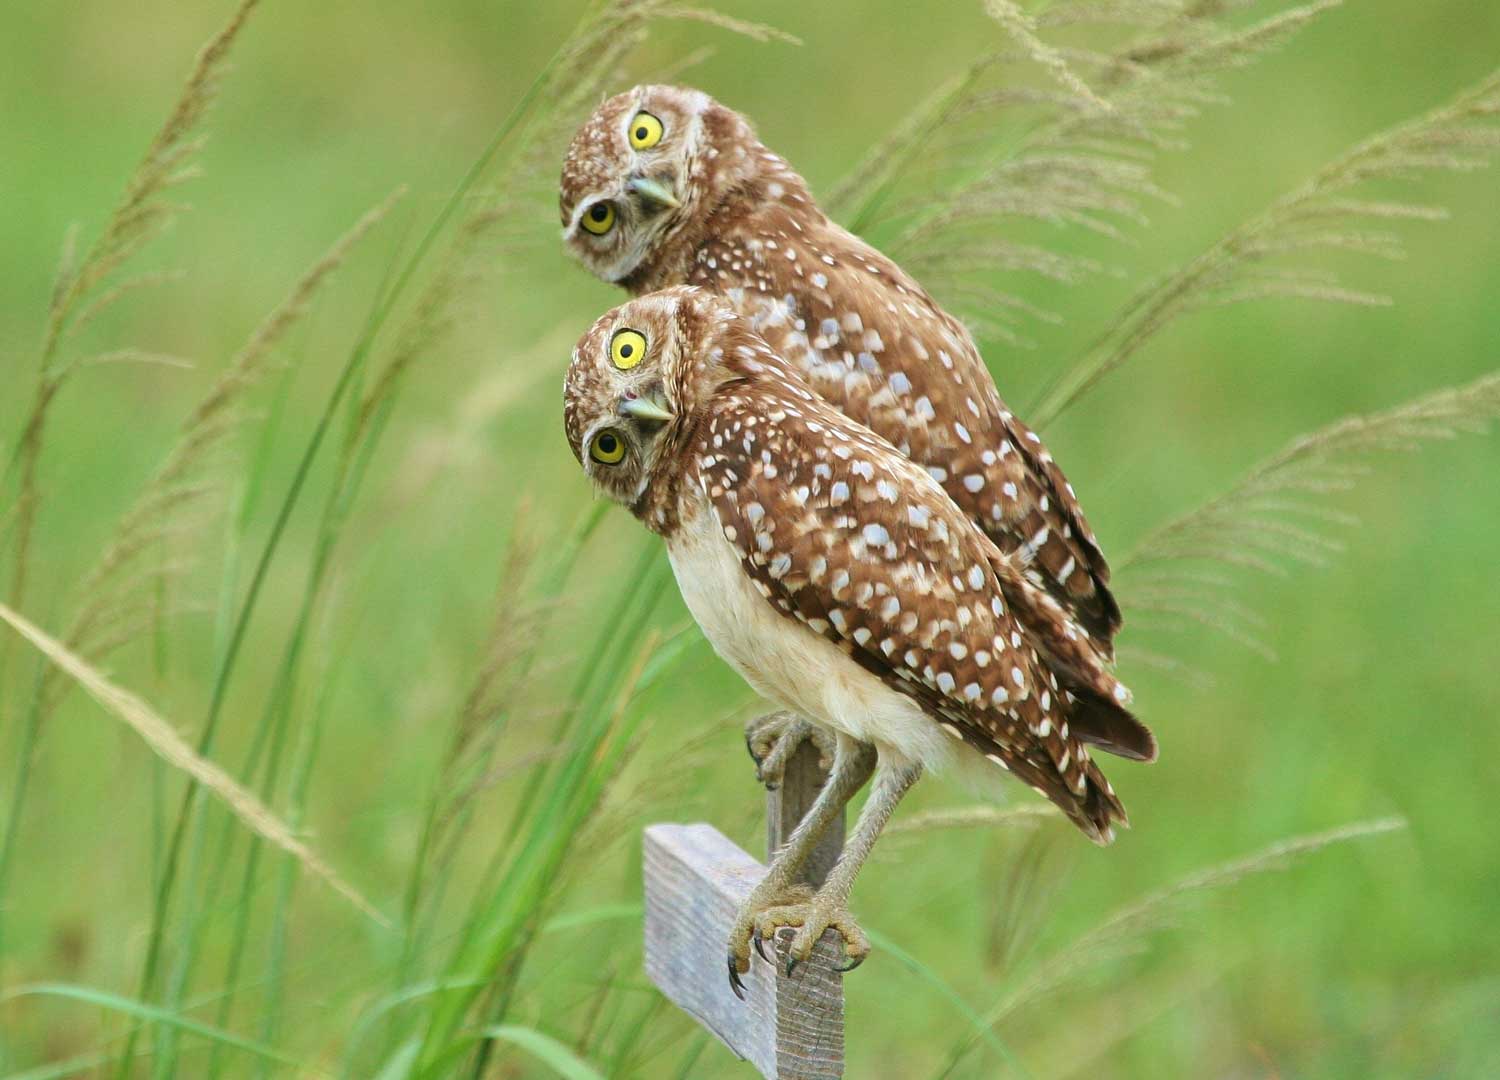 Two owls perched on a fence